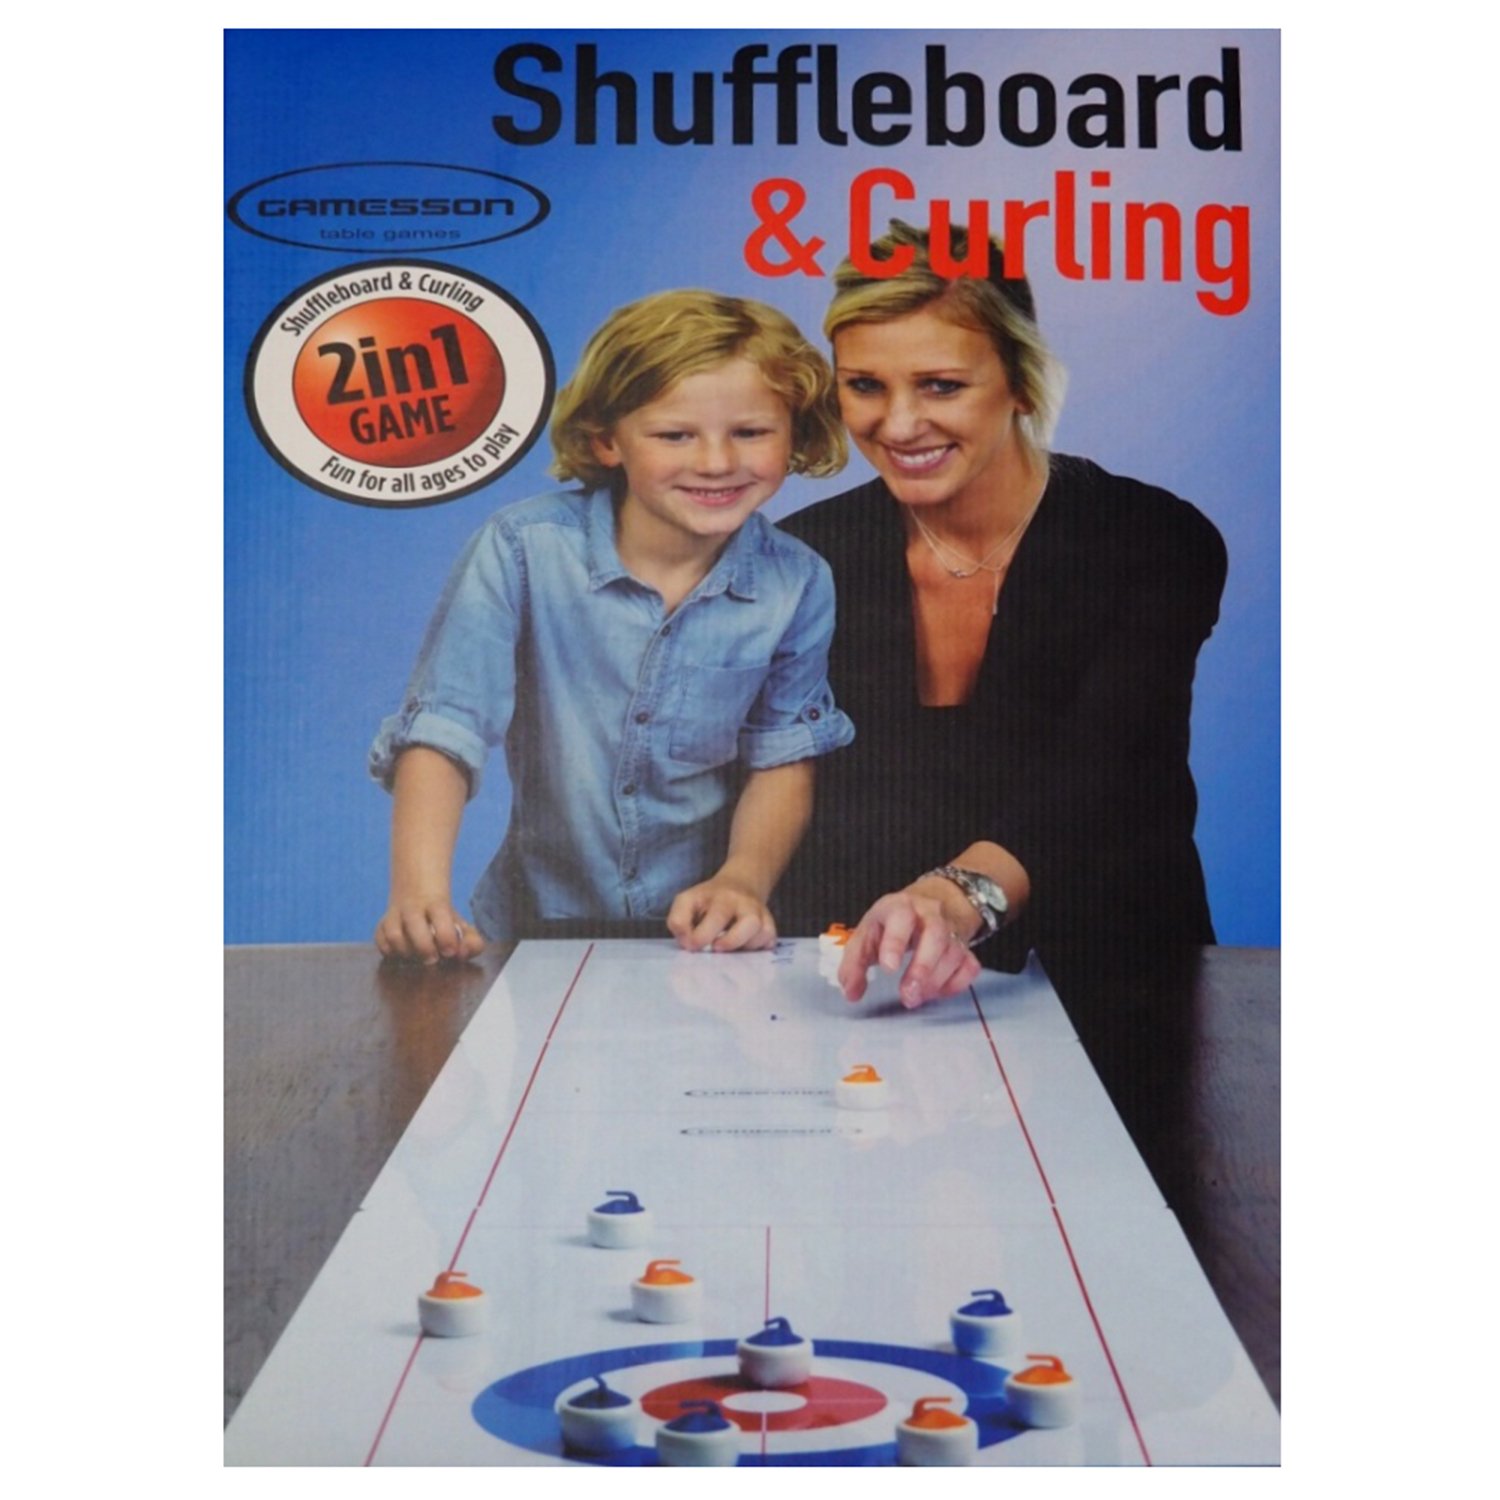 Gamesson Shuffleboard and Curling Game